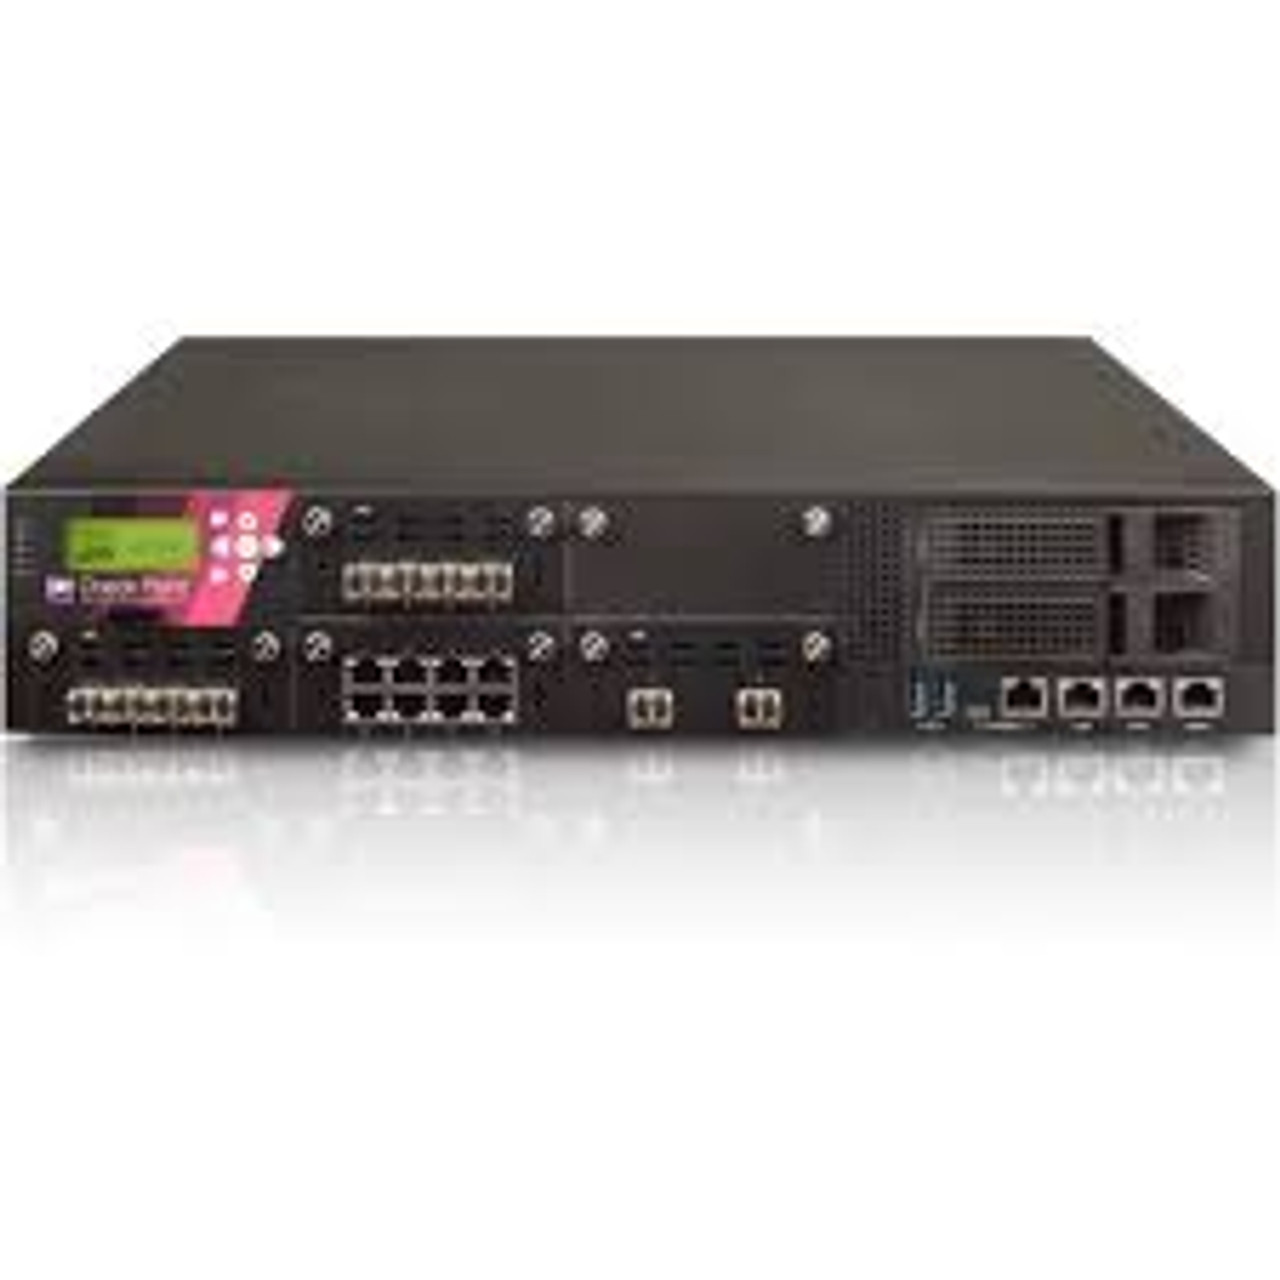 23800 Next Generation Threat Prevention & SandBlast (NGTX) Appliance - High Performance Package with 20 Virtual Systems